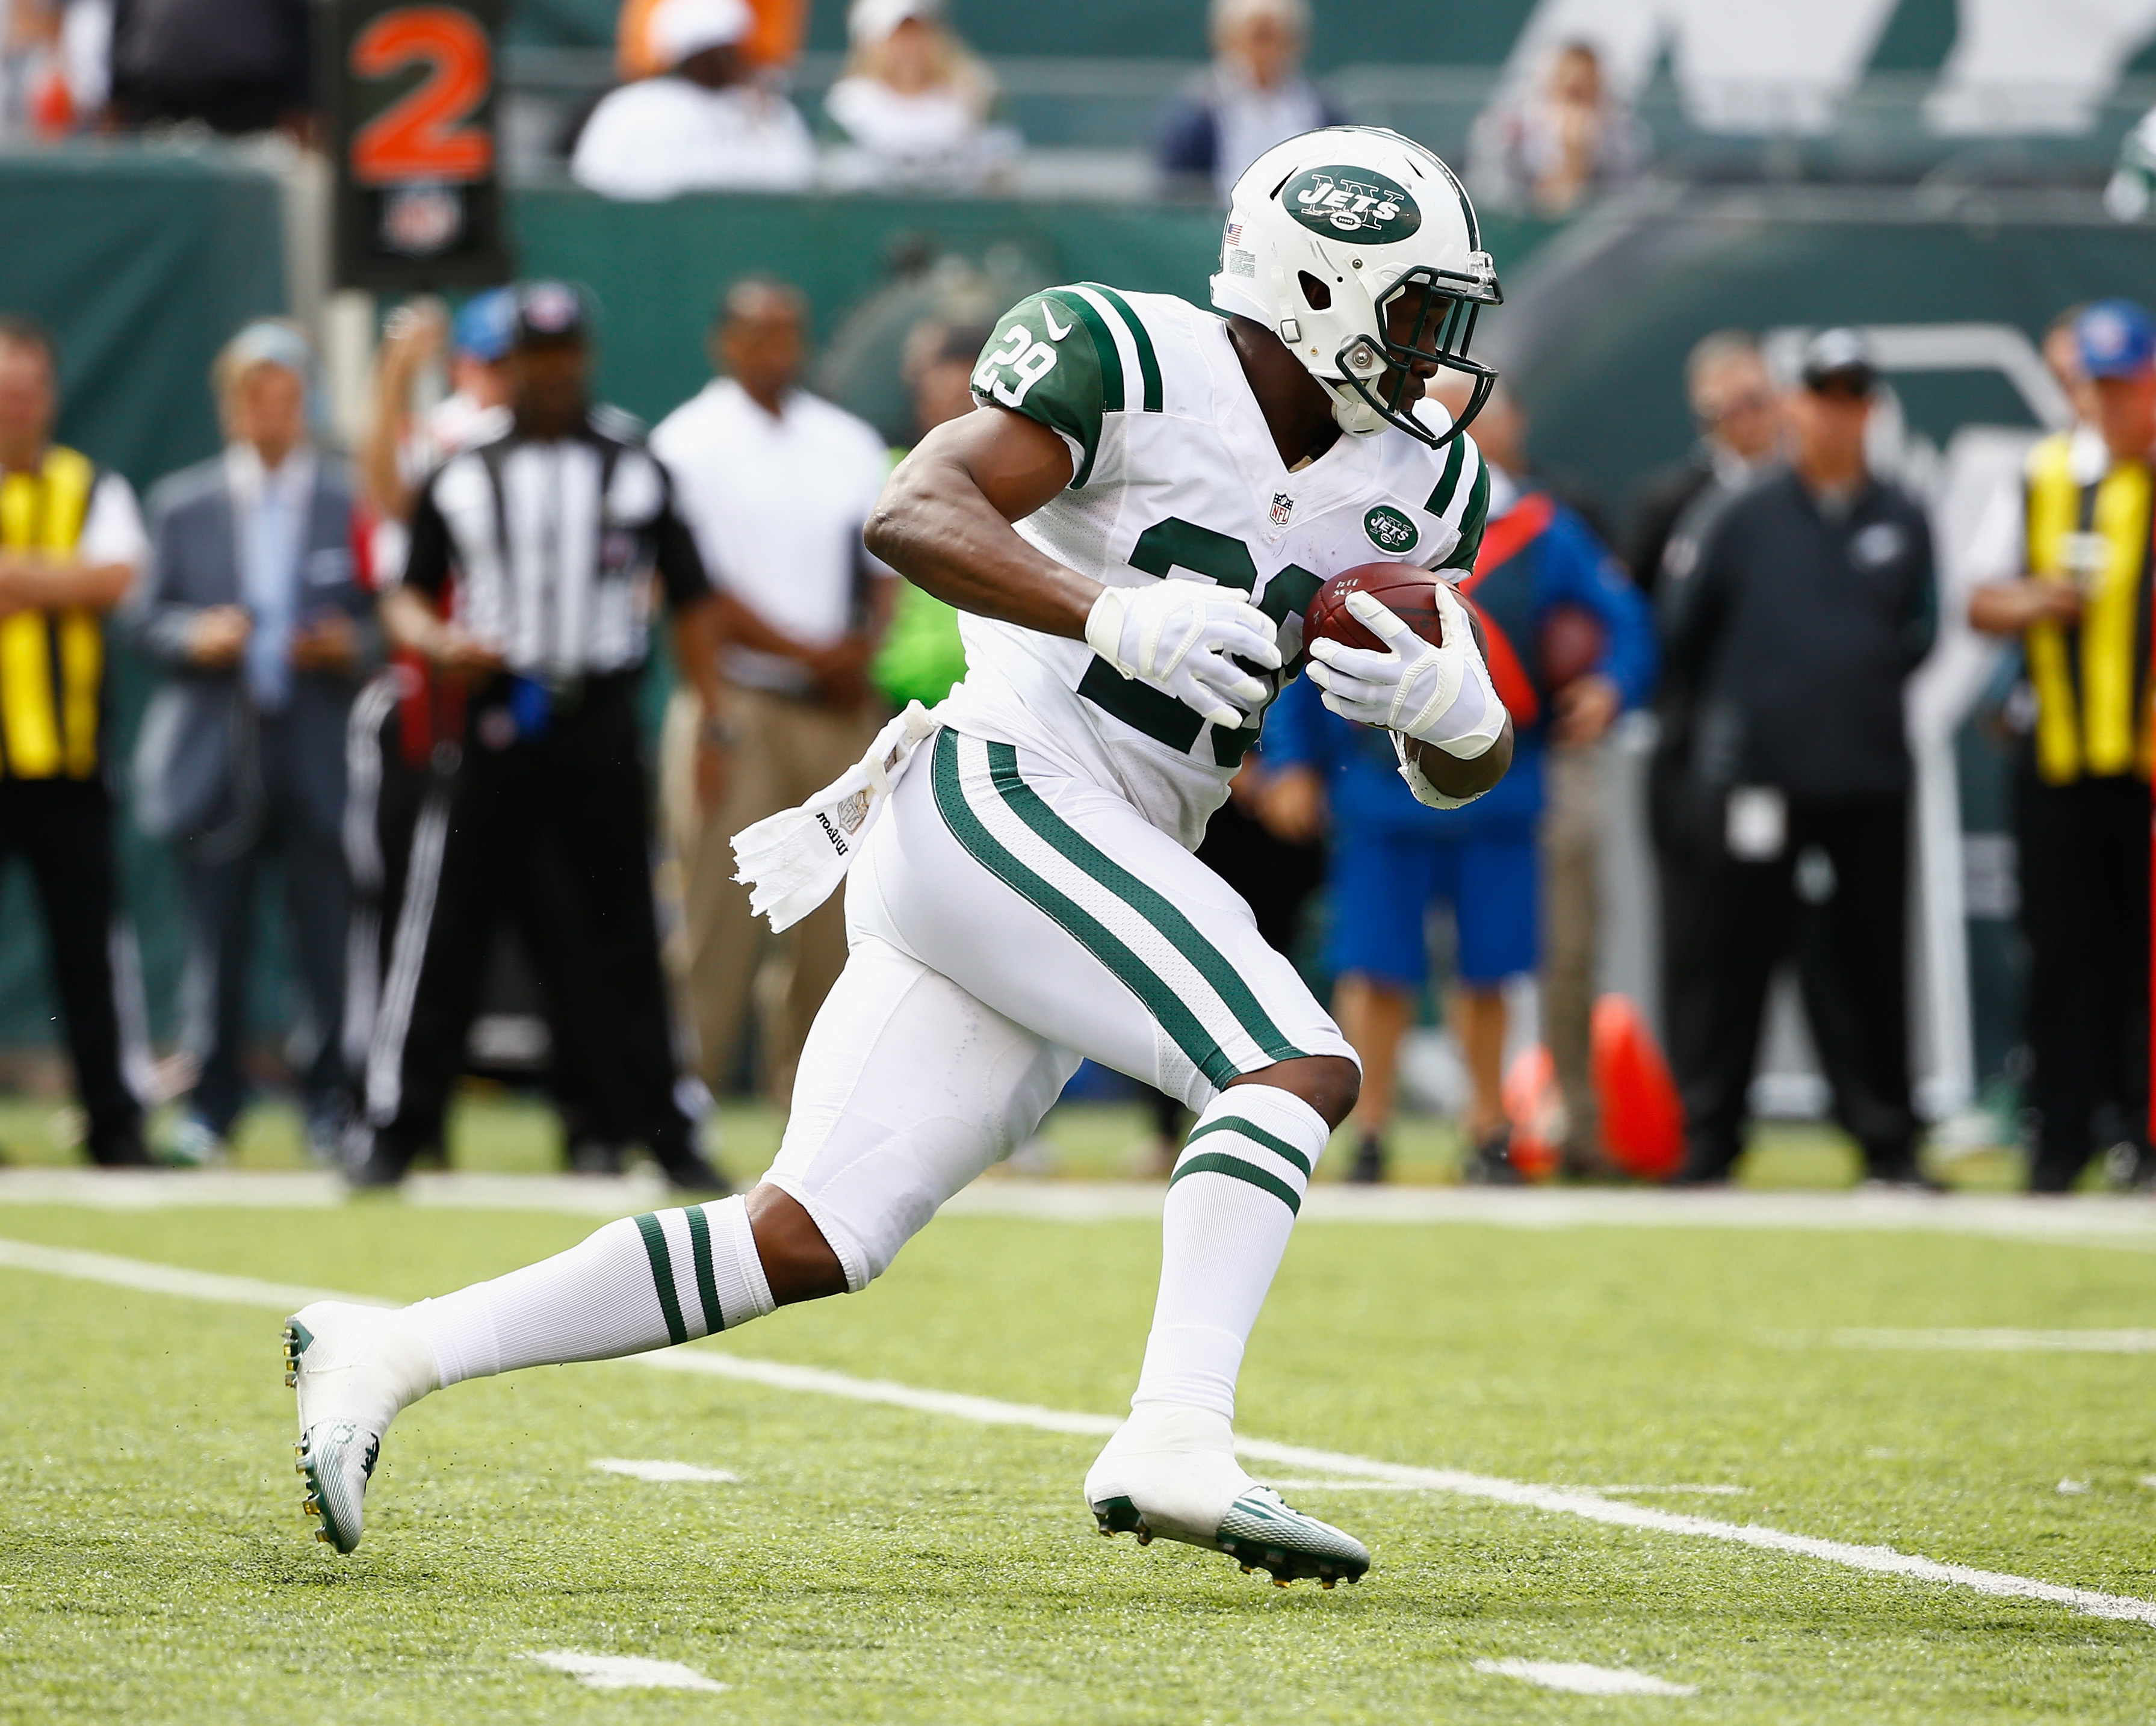 Bilal Powell #29 of the New York Jets runs against the Philadelphia Eagles during their game at MetLife Stadium on September 27, 2015 in East Rutherford, New Jersey. (Al Bello—Getty Images)